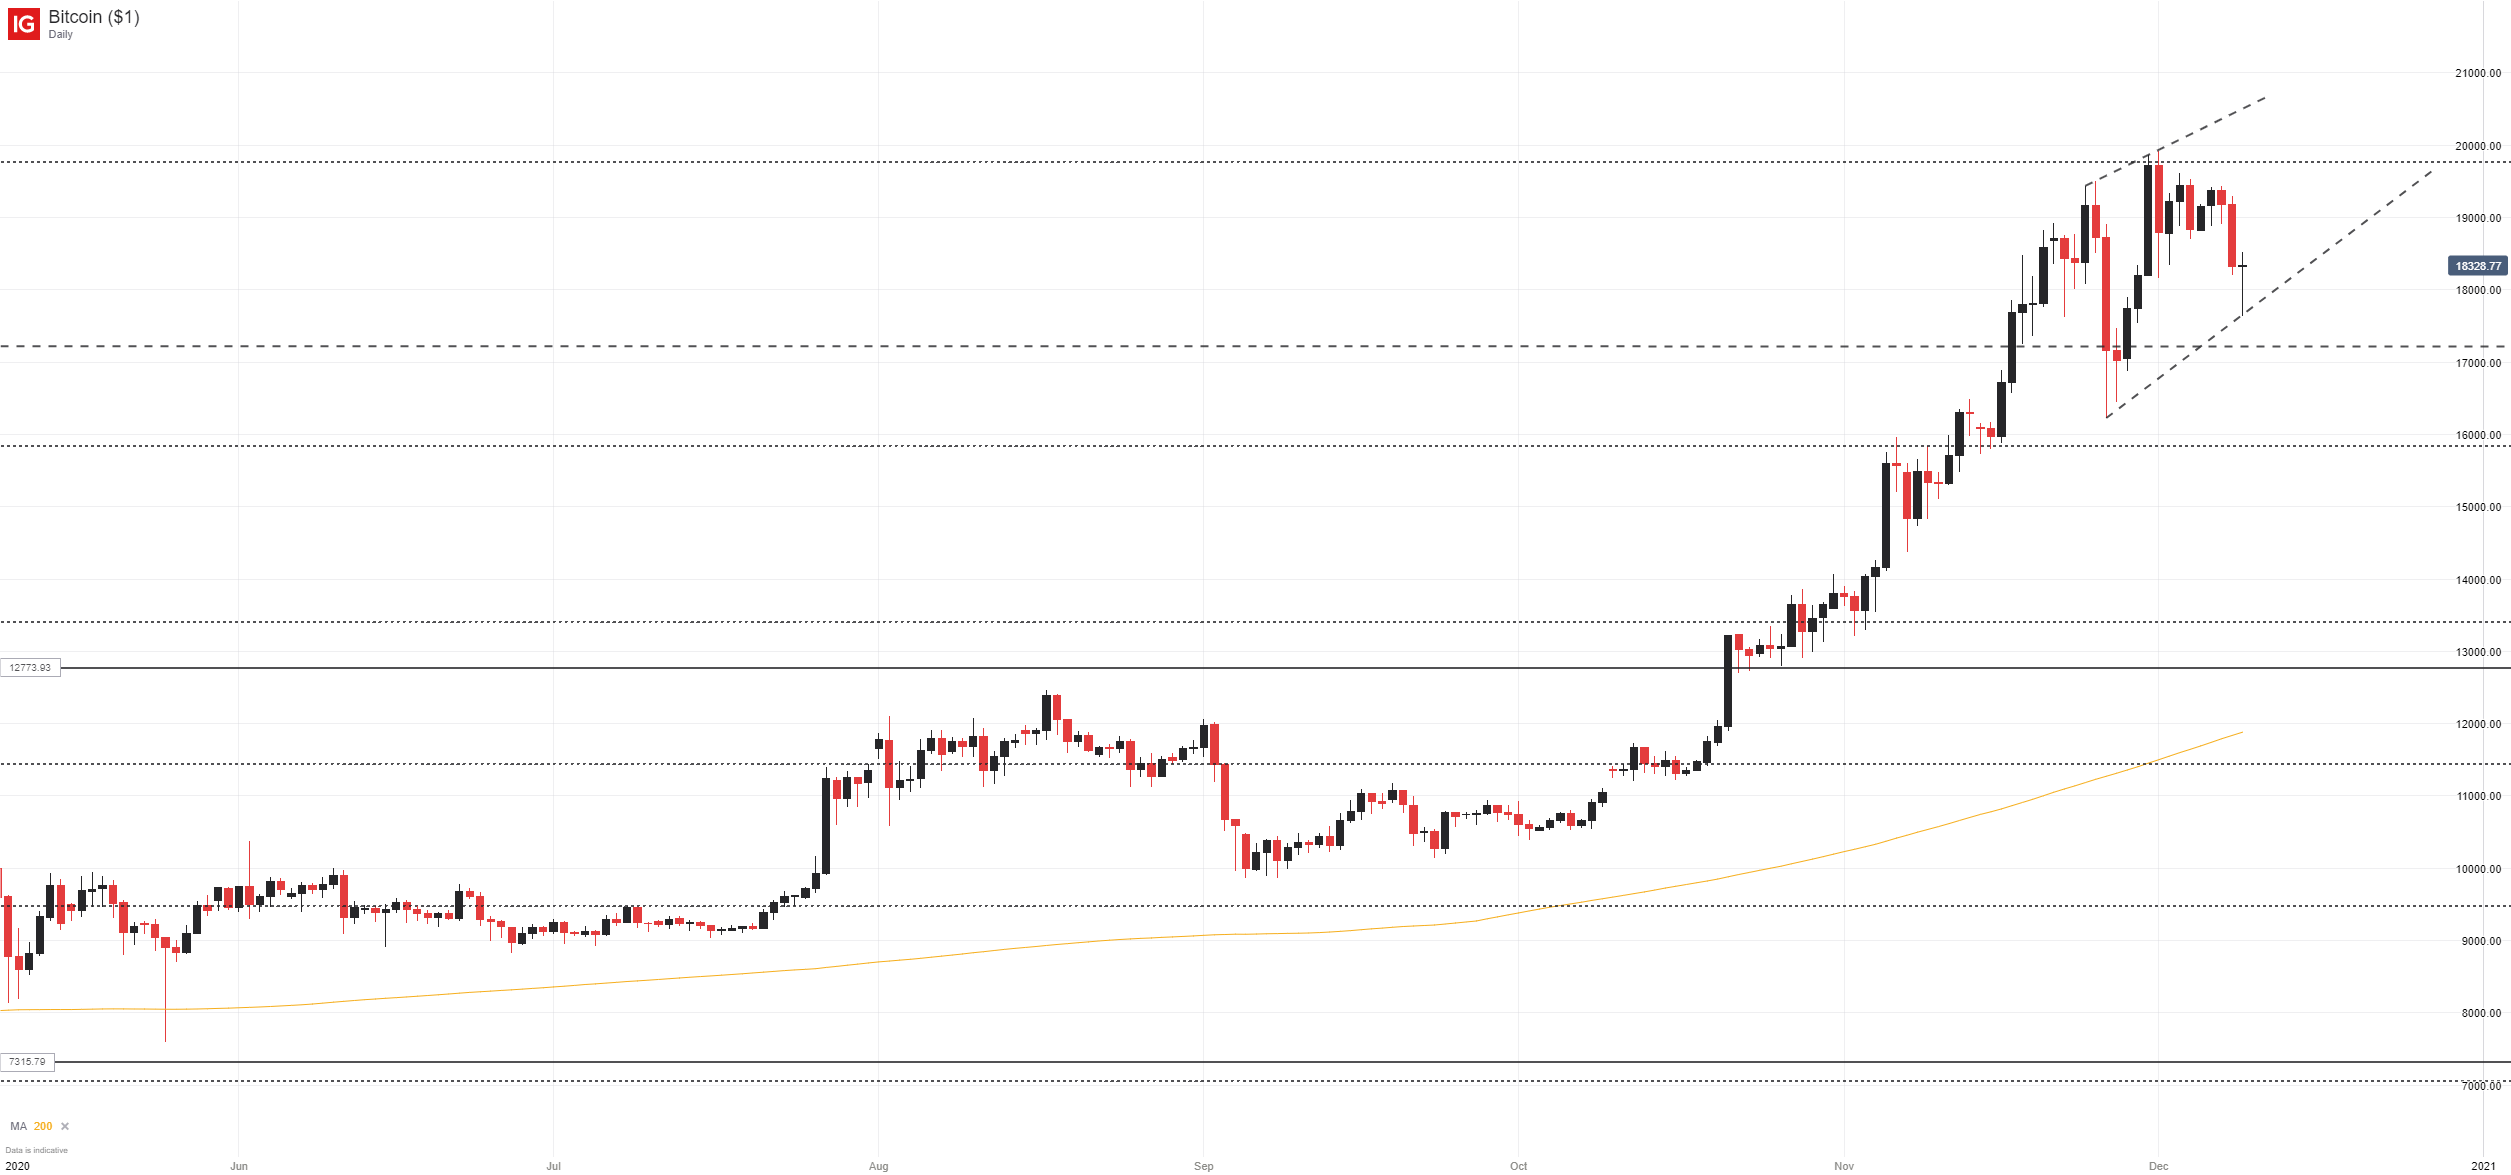 bitcoin price usd real time